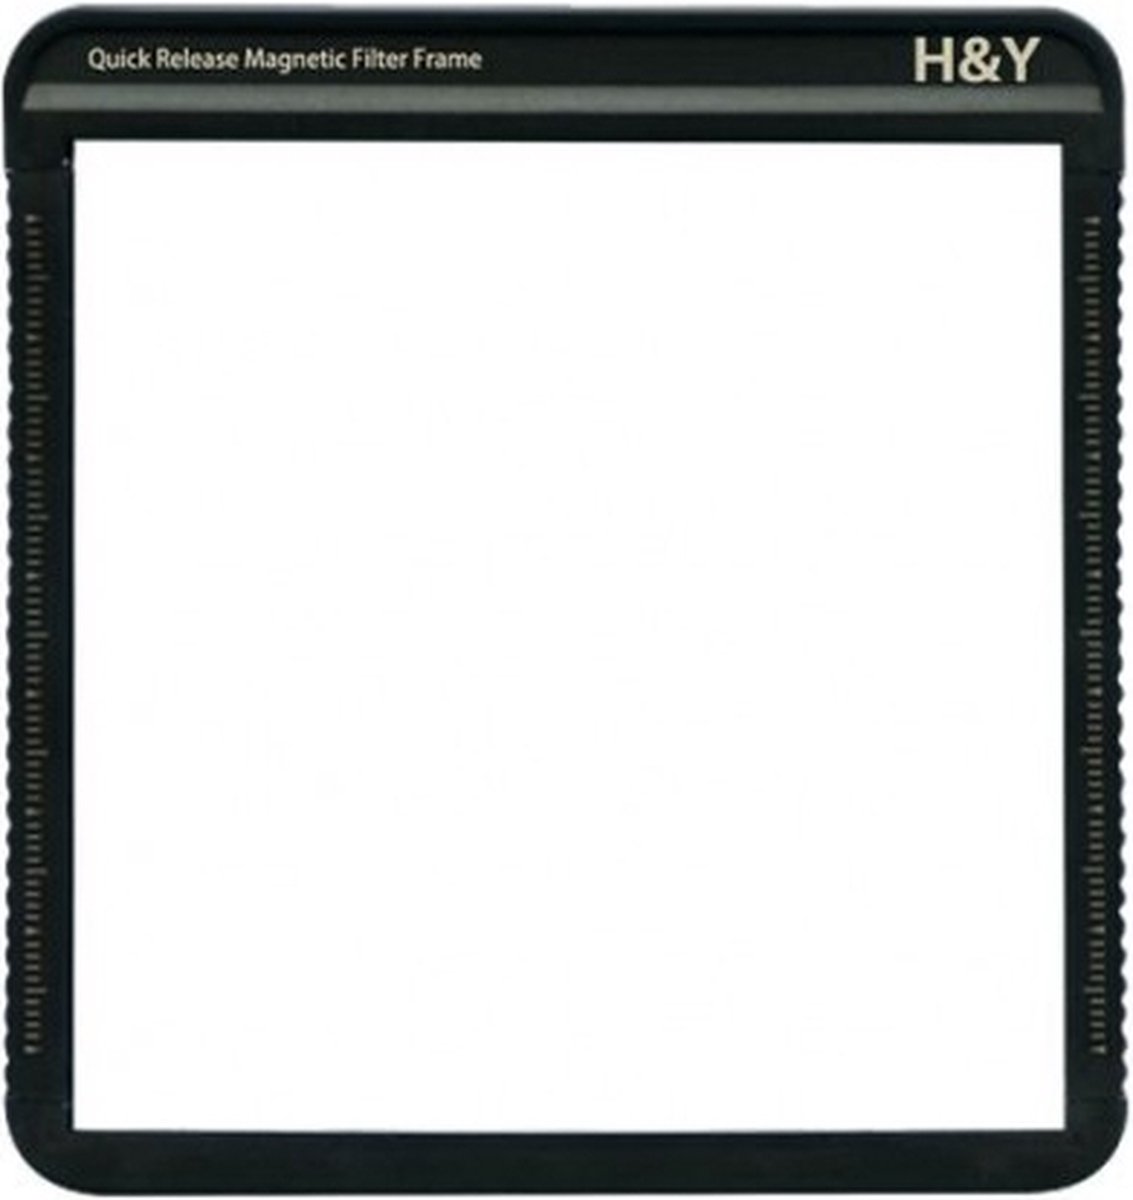 H&Y Quick Release Magnetic Filter Frame 100x100